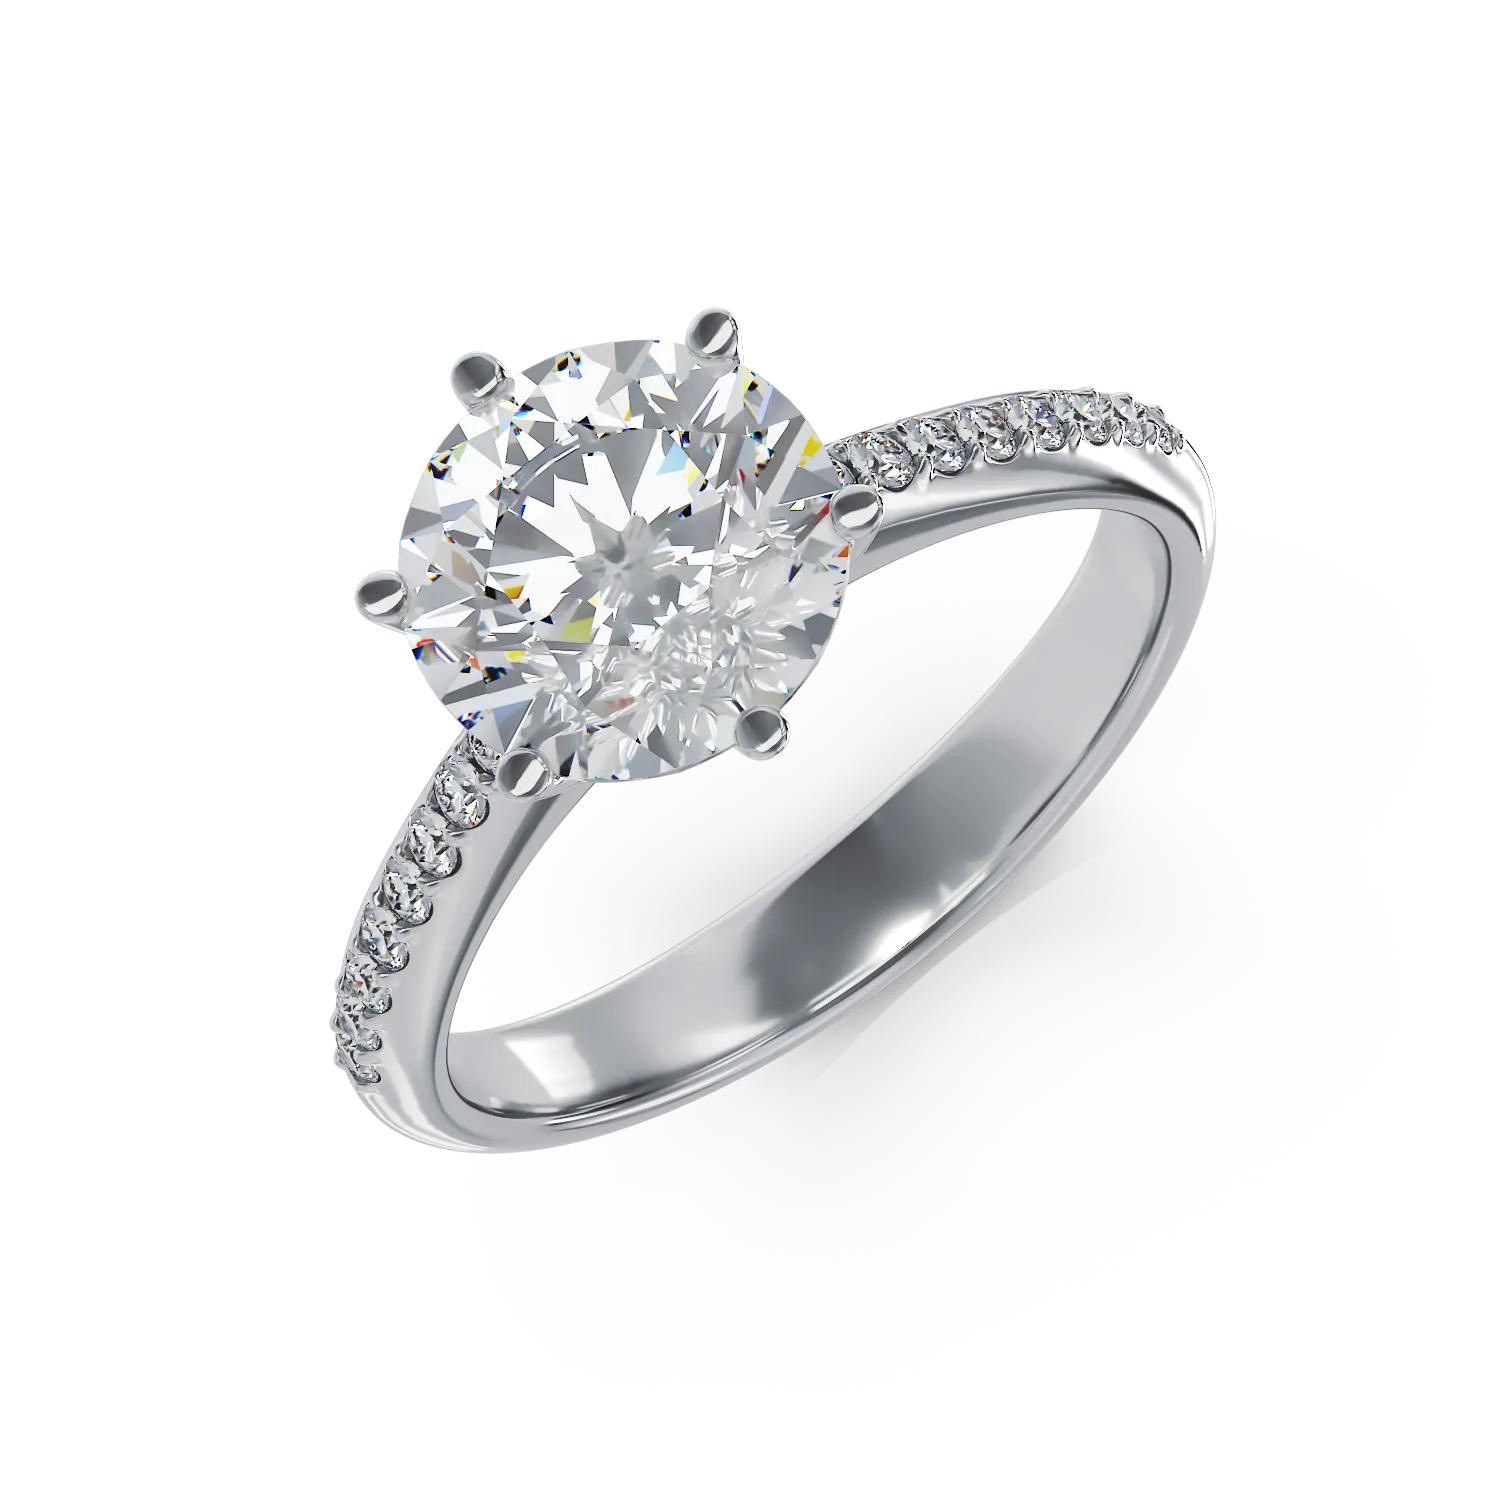 White gold engagement ring with a 2.01ct diamond and 0.14ct diamonds